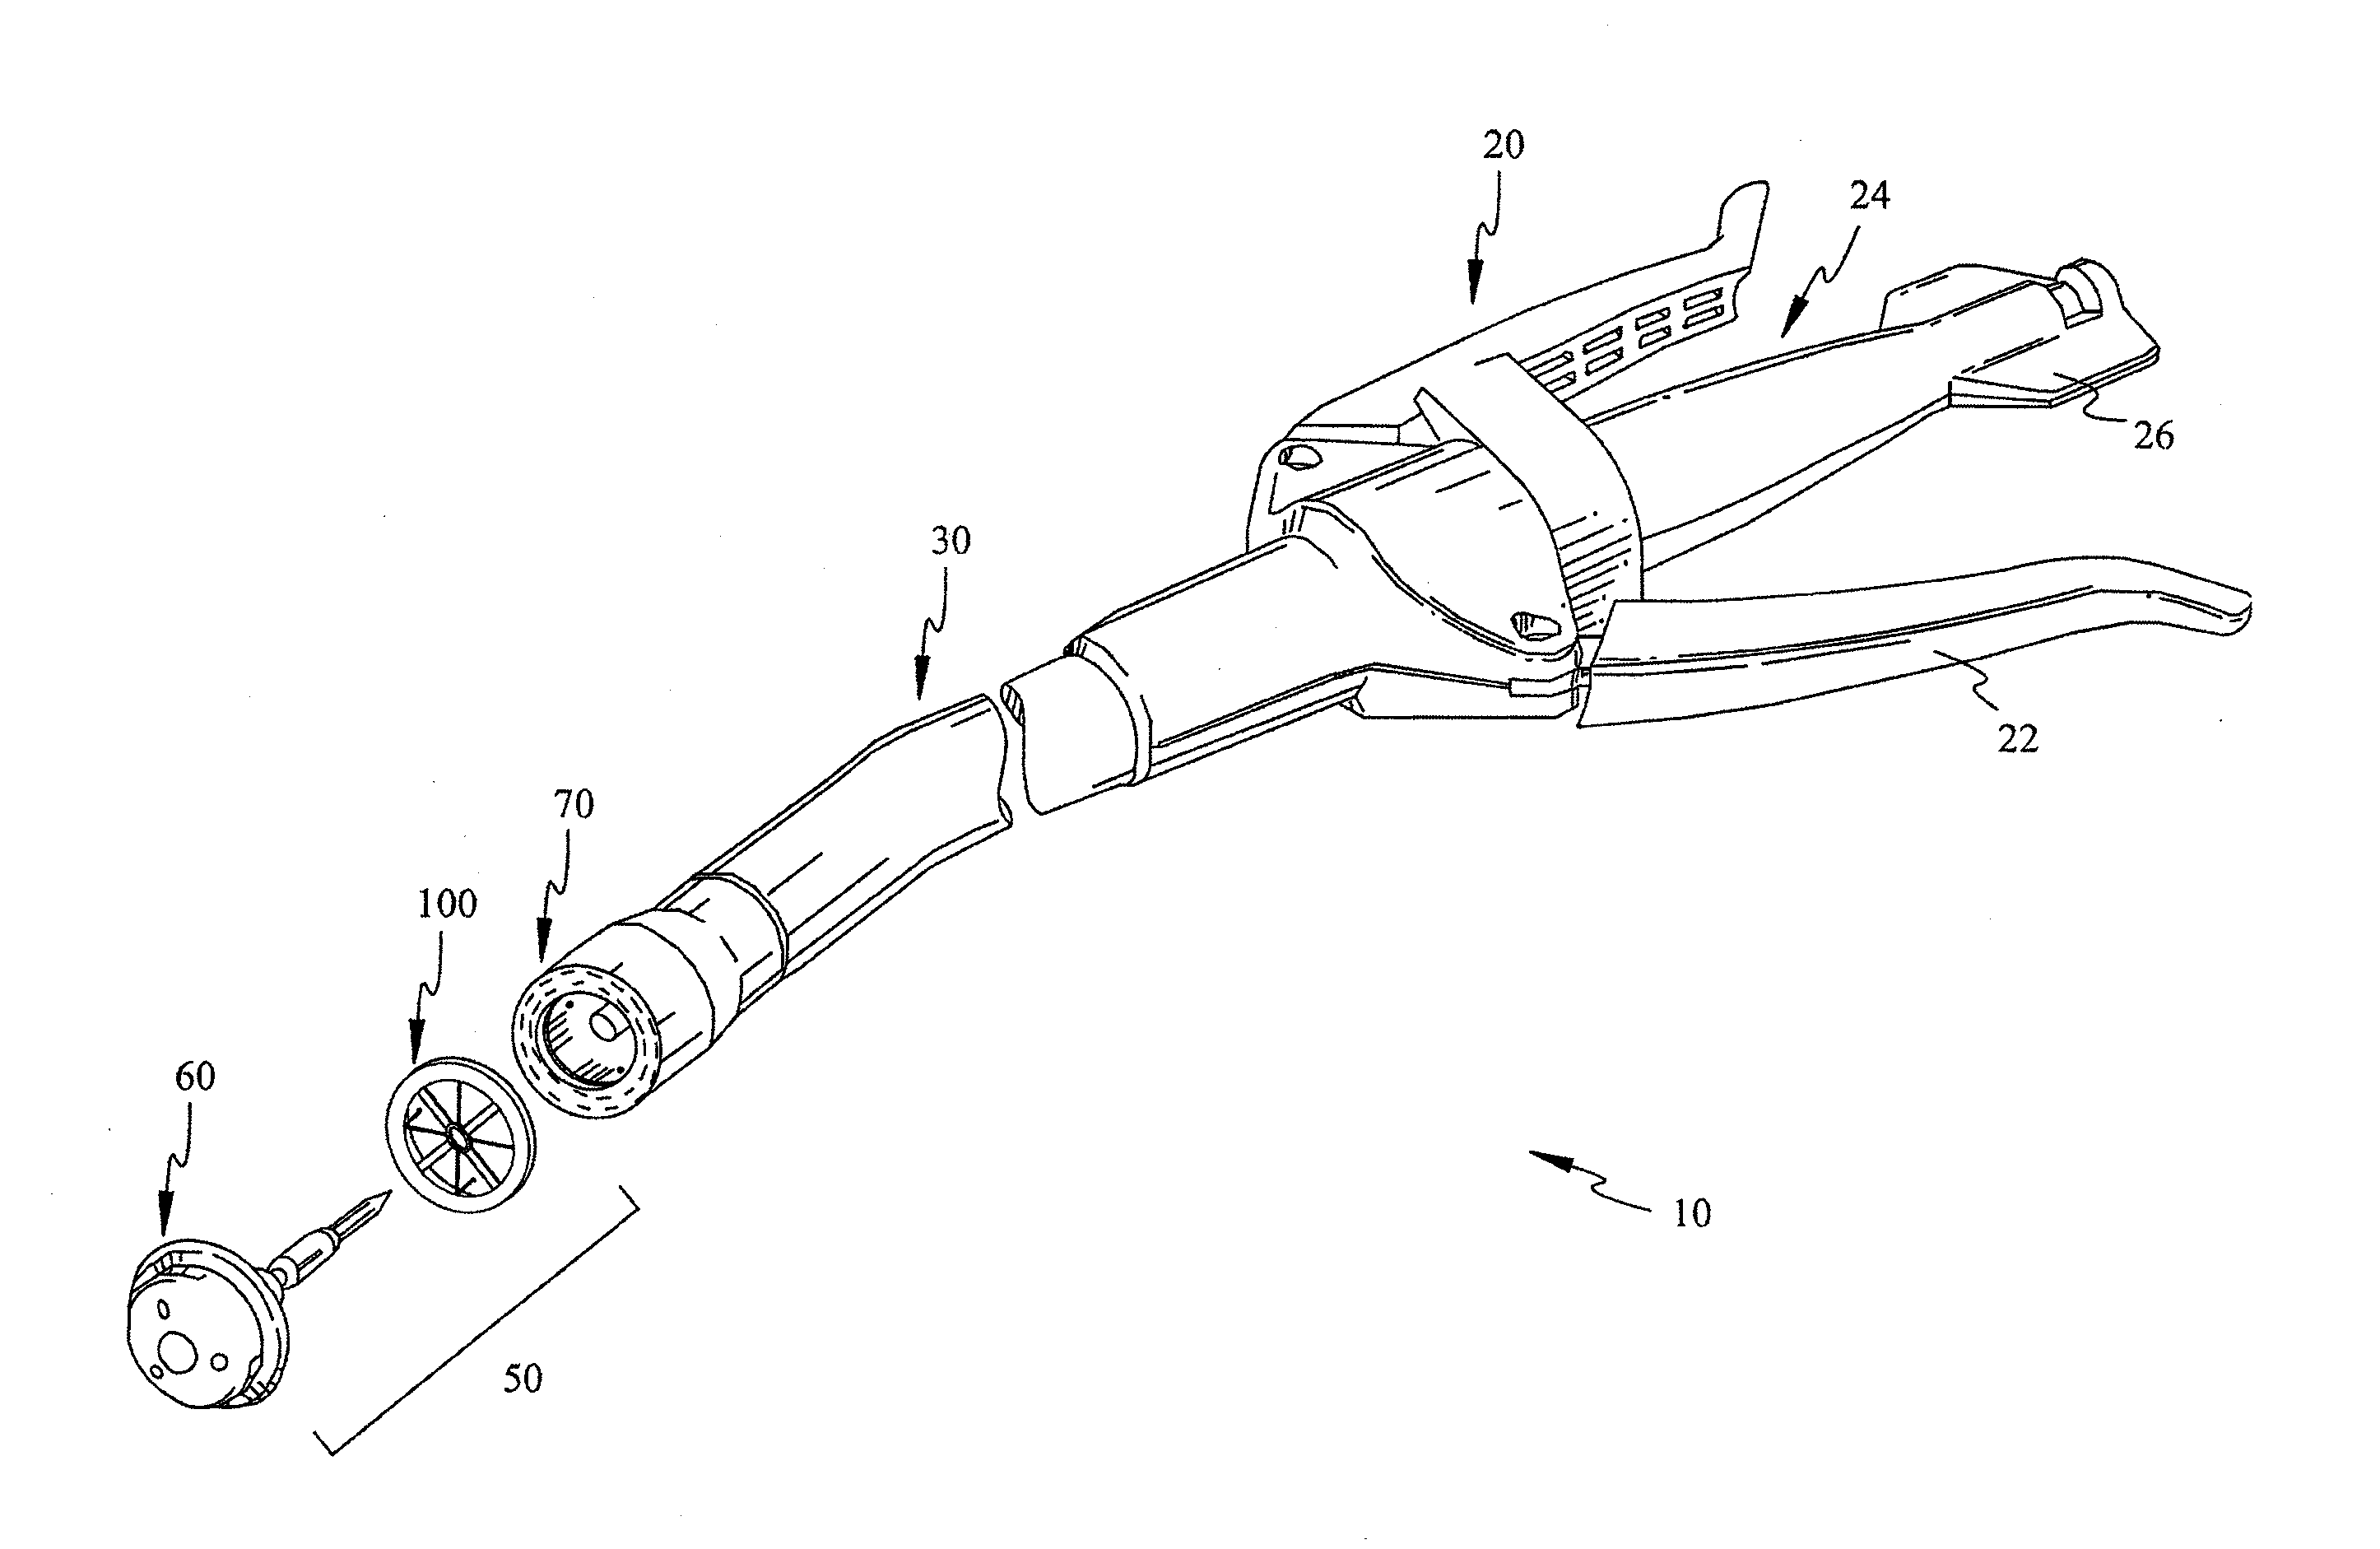 Buttress Assembly for Use with Surgical Stapling Device